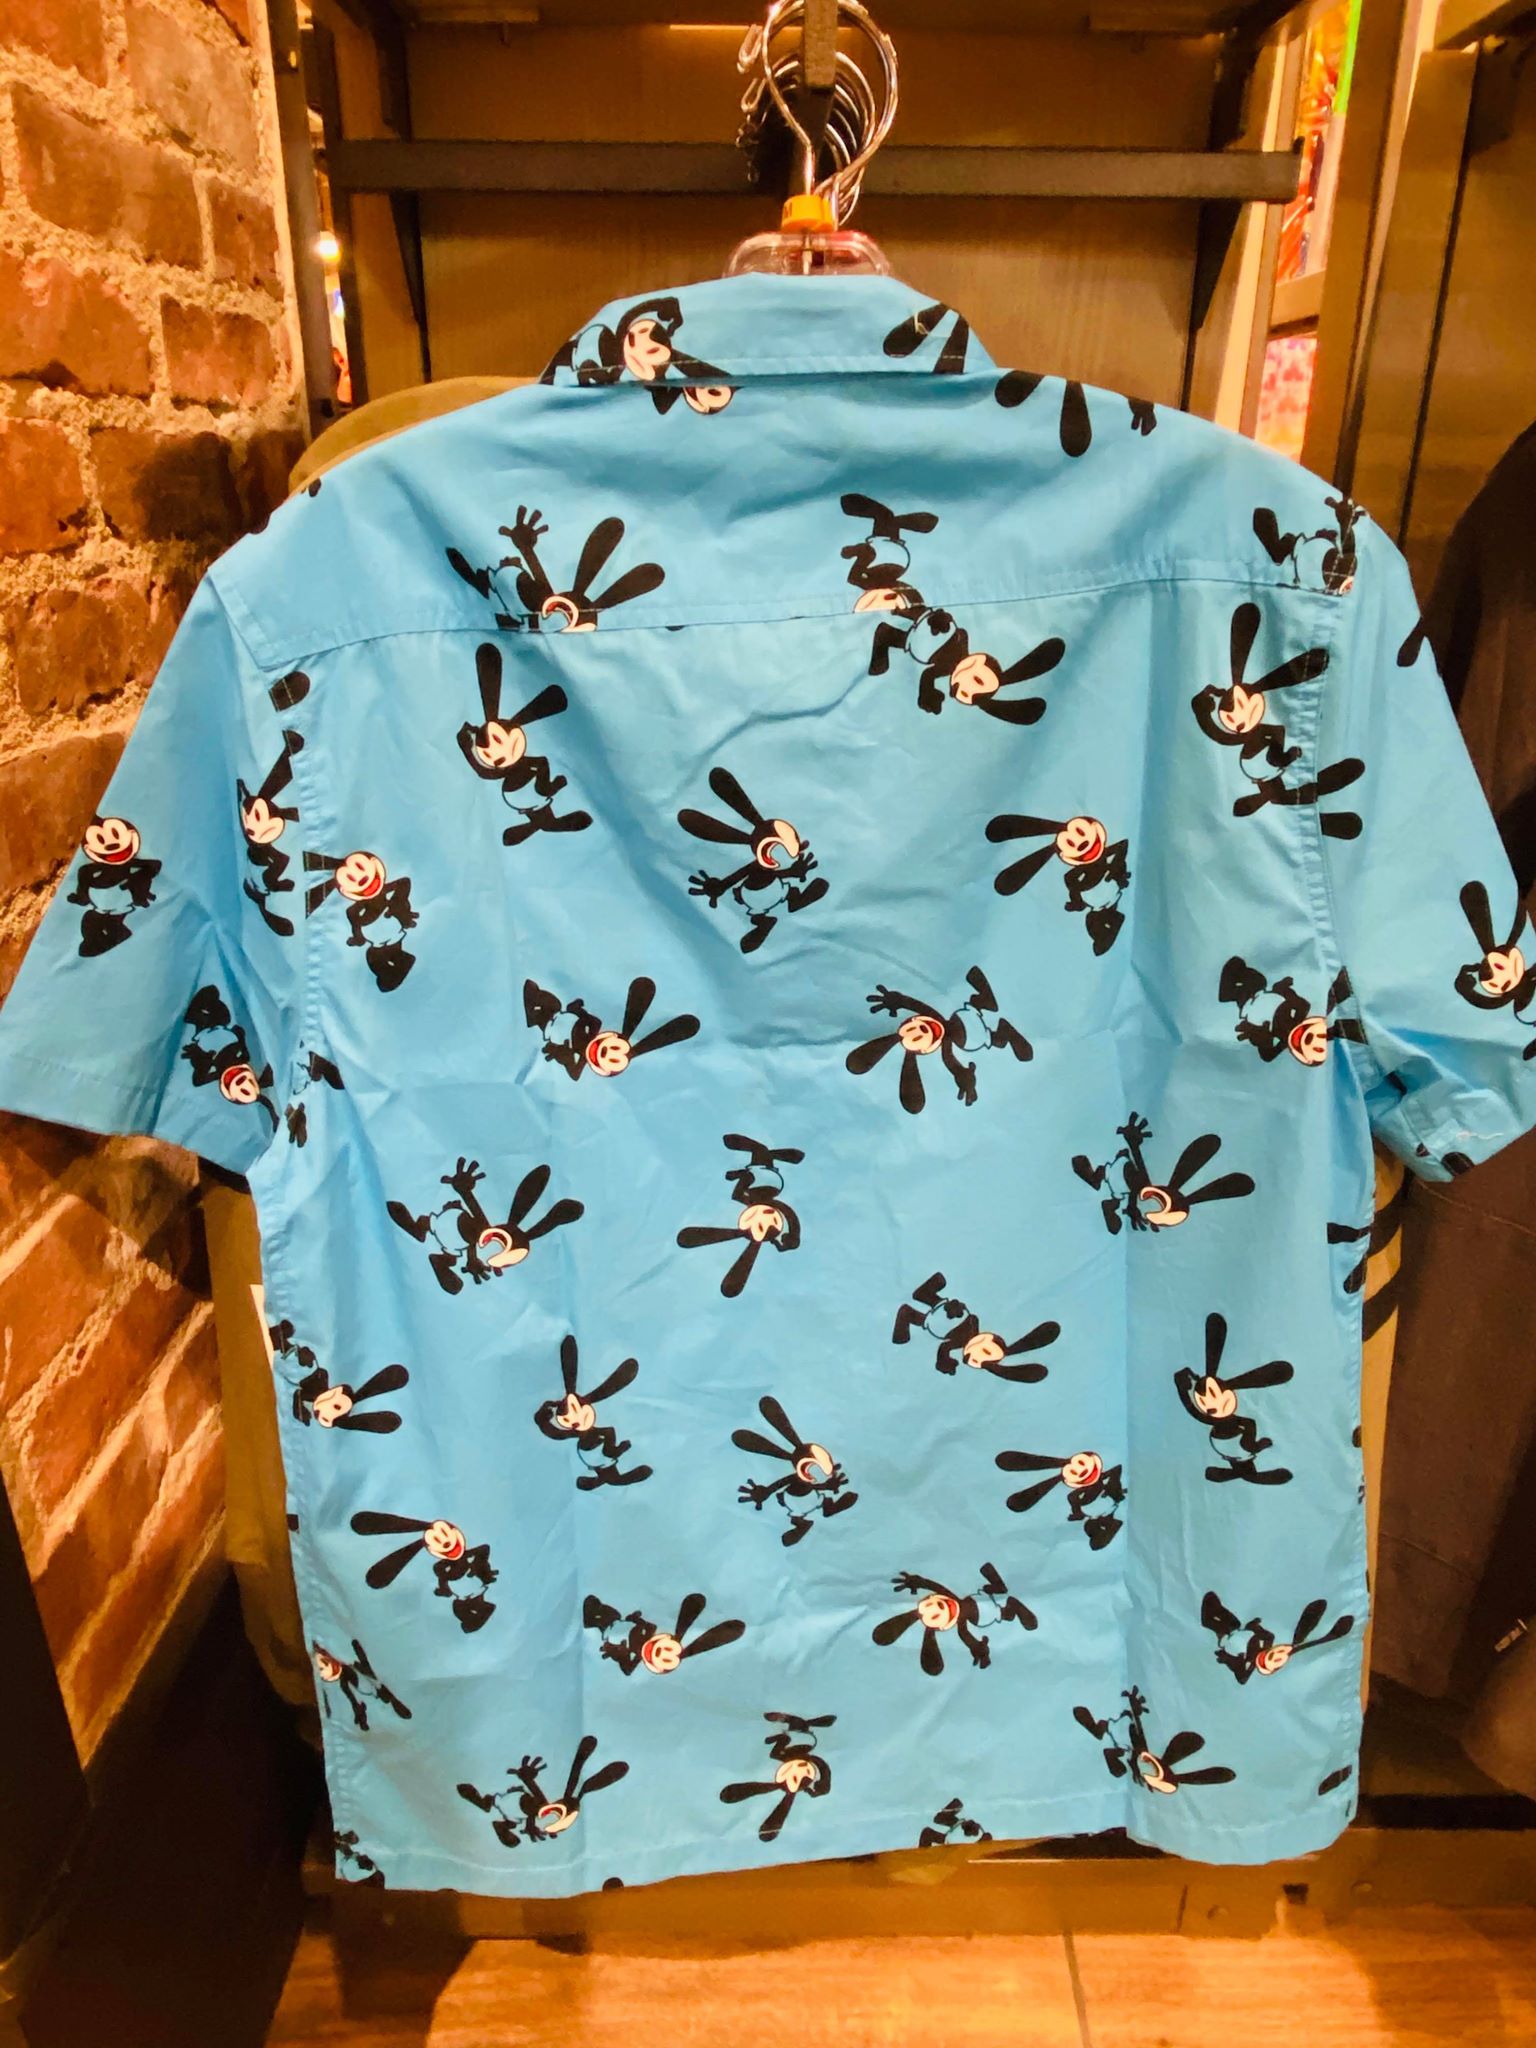 These New Disney Button-Downs Are Brimming With Character! - MickeyBlog.com